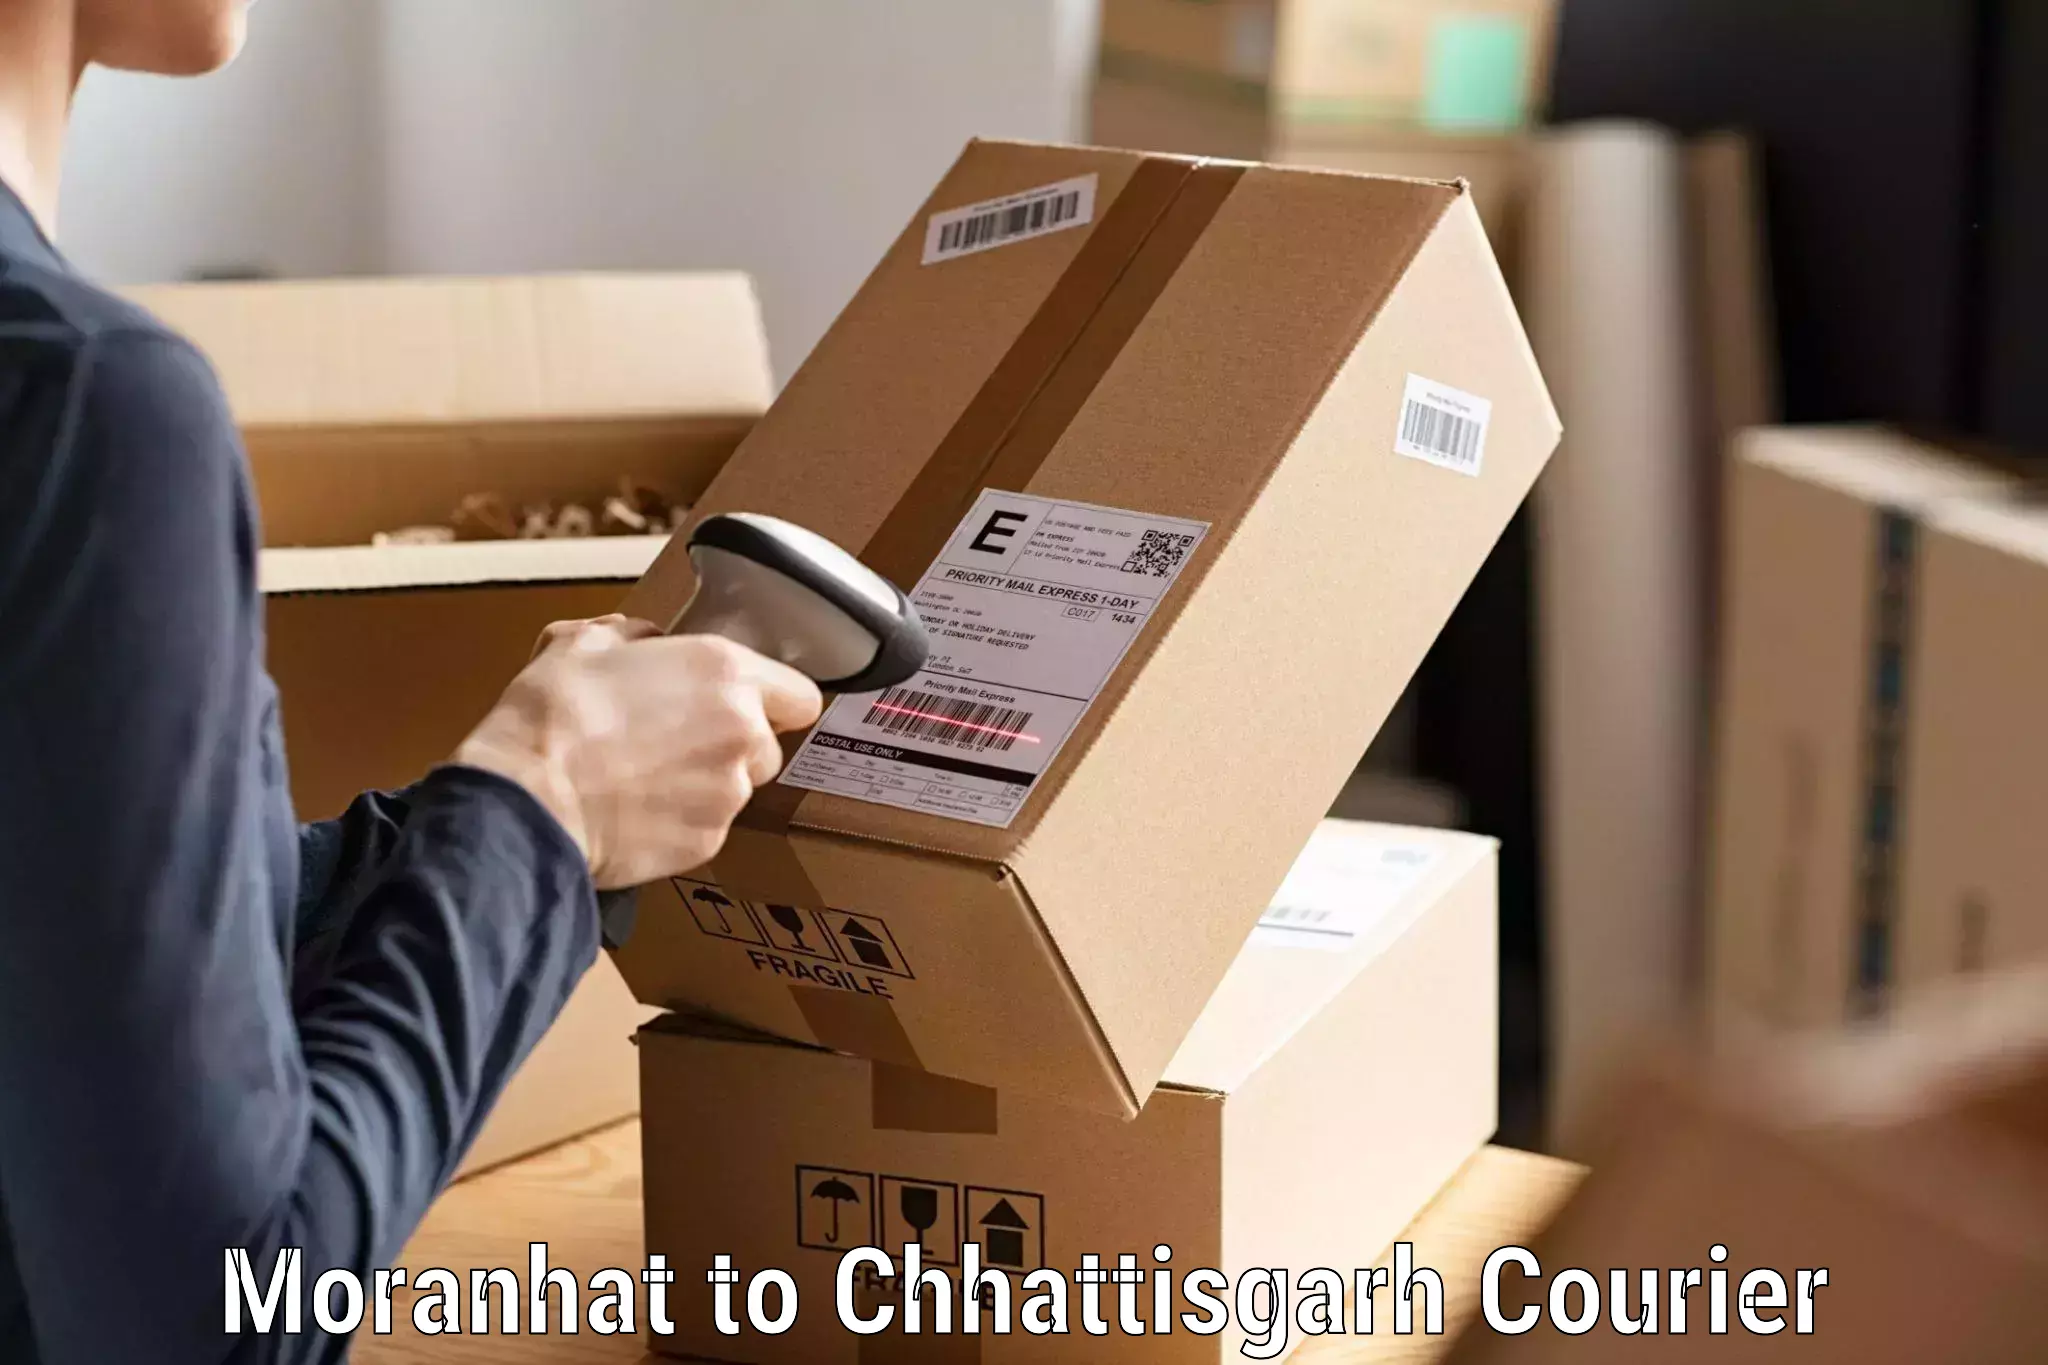 Courier service comparison Moranhat to Dharamjaigarh